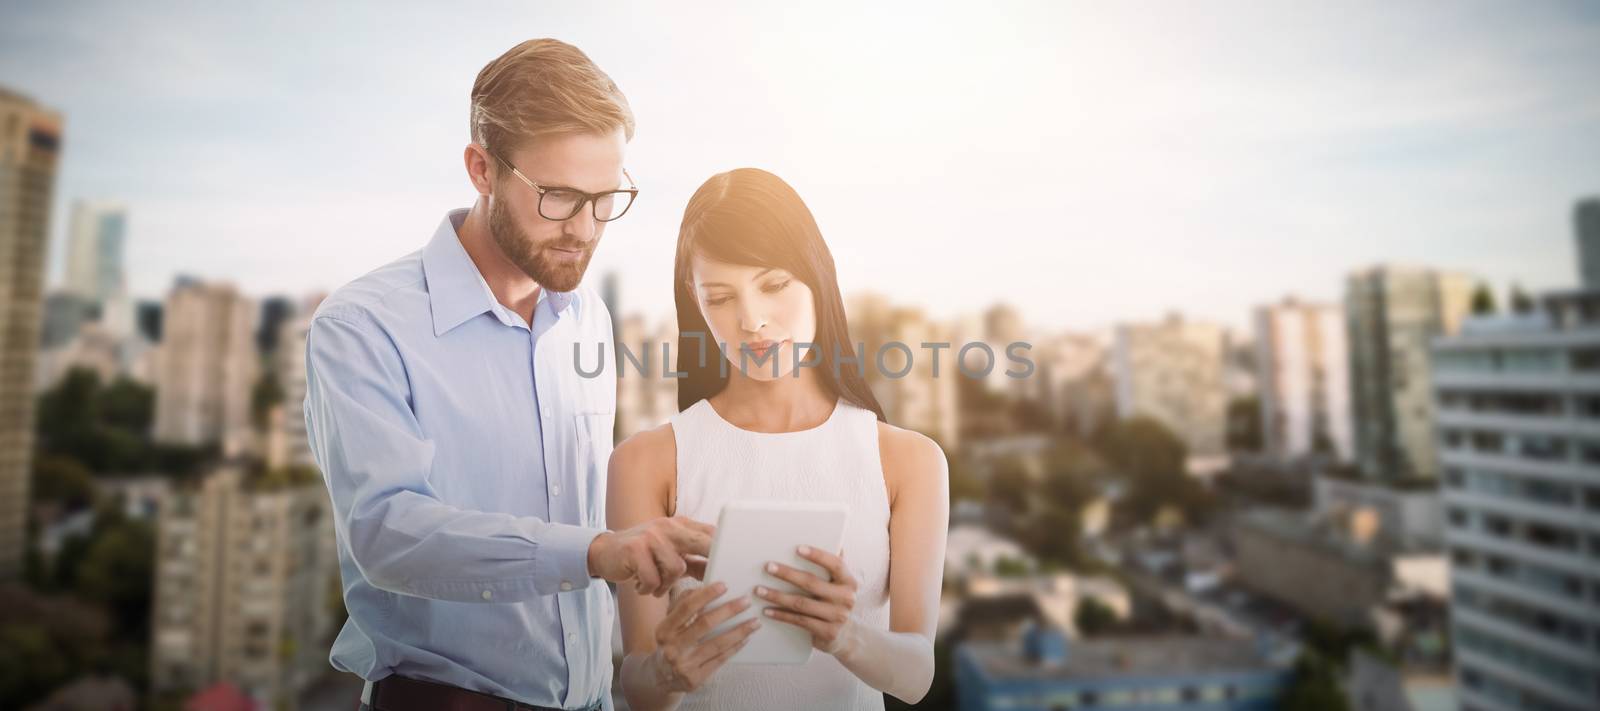 Composite image of business people looking at tablet by Wavebreakmedia